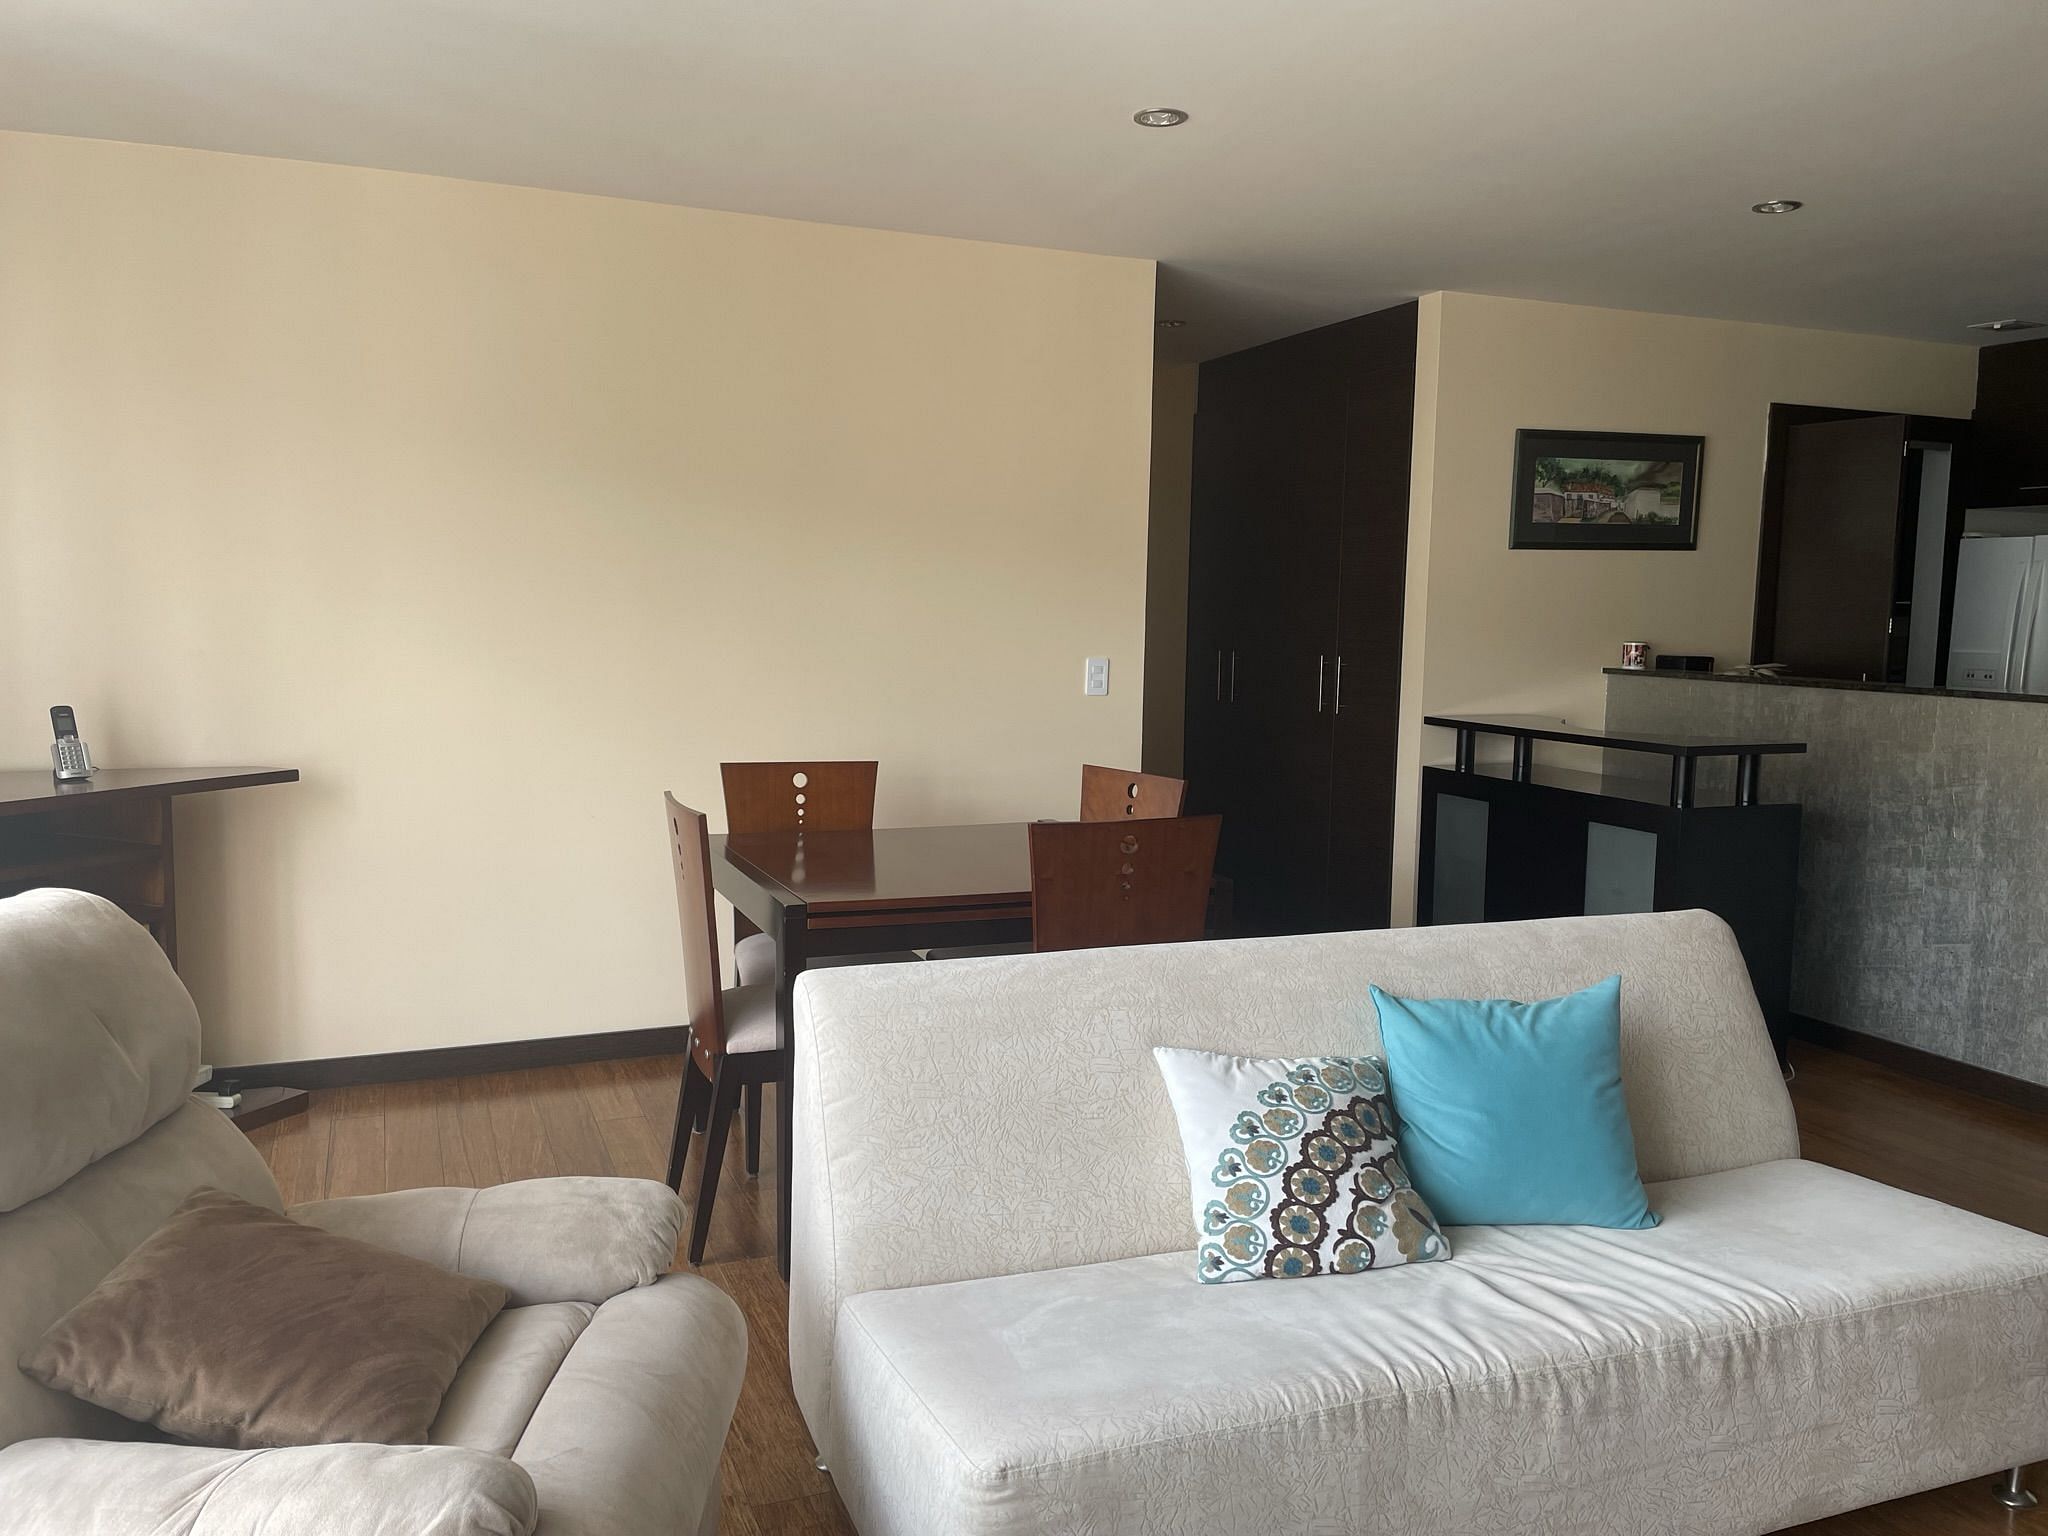 JWguest Apartment at Quito, Pichincha | Comfortable and complete department in Quito | Jwbnb no brobnb 7